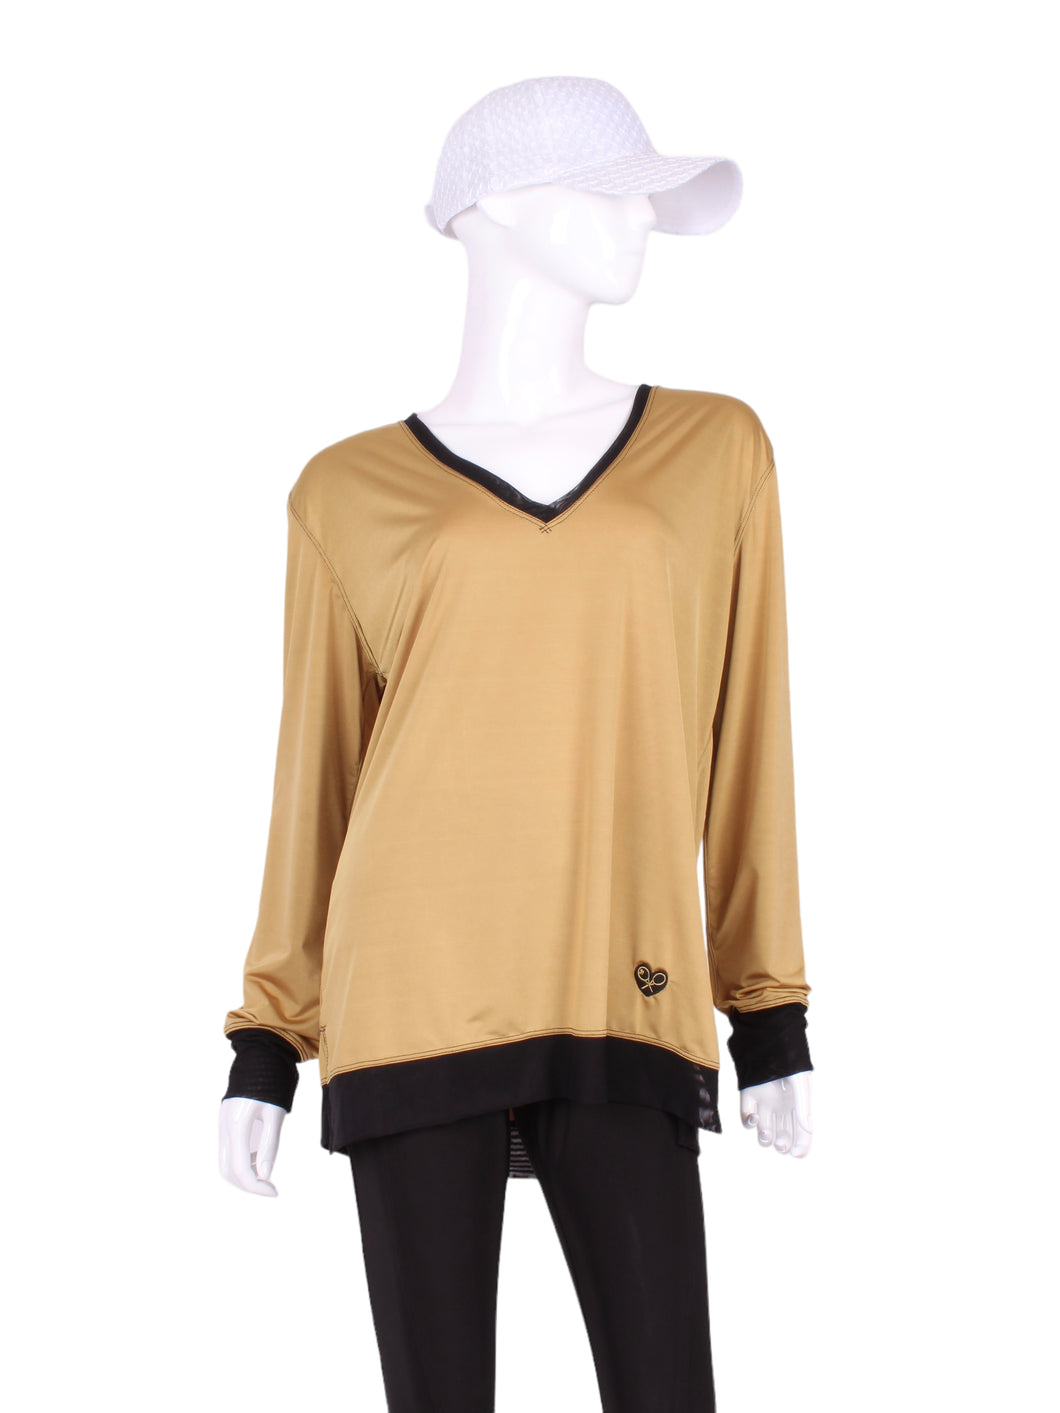 This top is soooo gorgeous!  The collar and cuffs are accented with feminine mesh and the body is flowy and soft.  It’s called the Long Sleeve Very Vee Tee - because as you can see - the Vee is - well you know - VERY VEE!